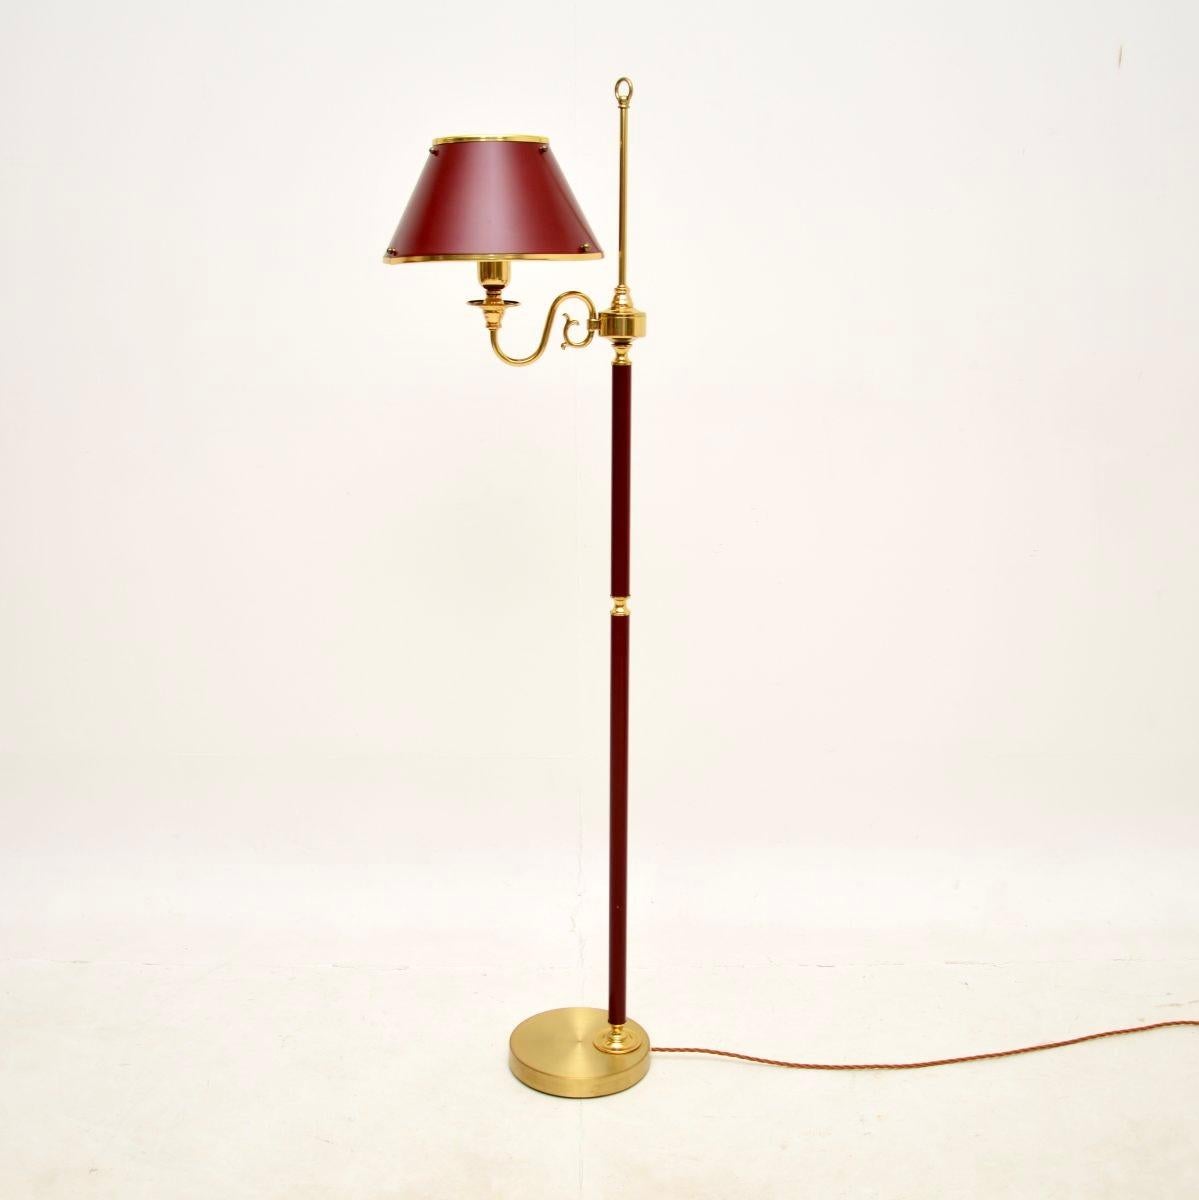 A stylish and extremely well made vintage Swedish enameled tole and brass floor lamp by Borens. This was recently imported from Sweden, it dates from around the 1970’s.

The quality is superb, this is beautifully made with the brass finish and red